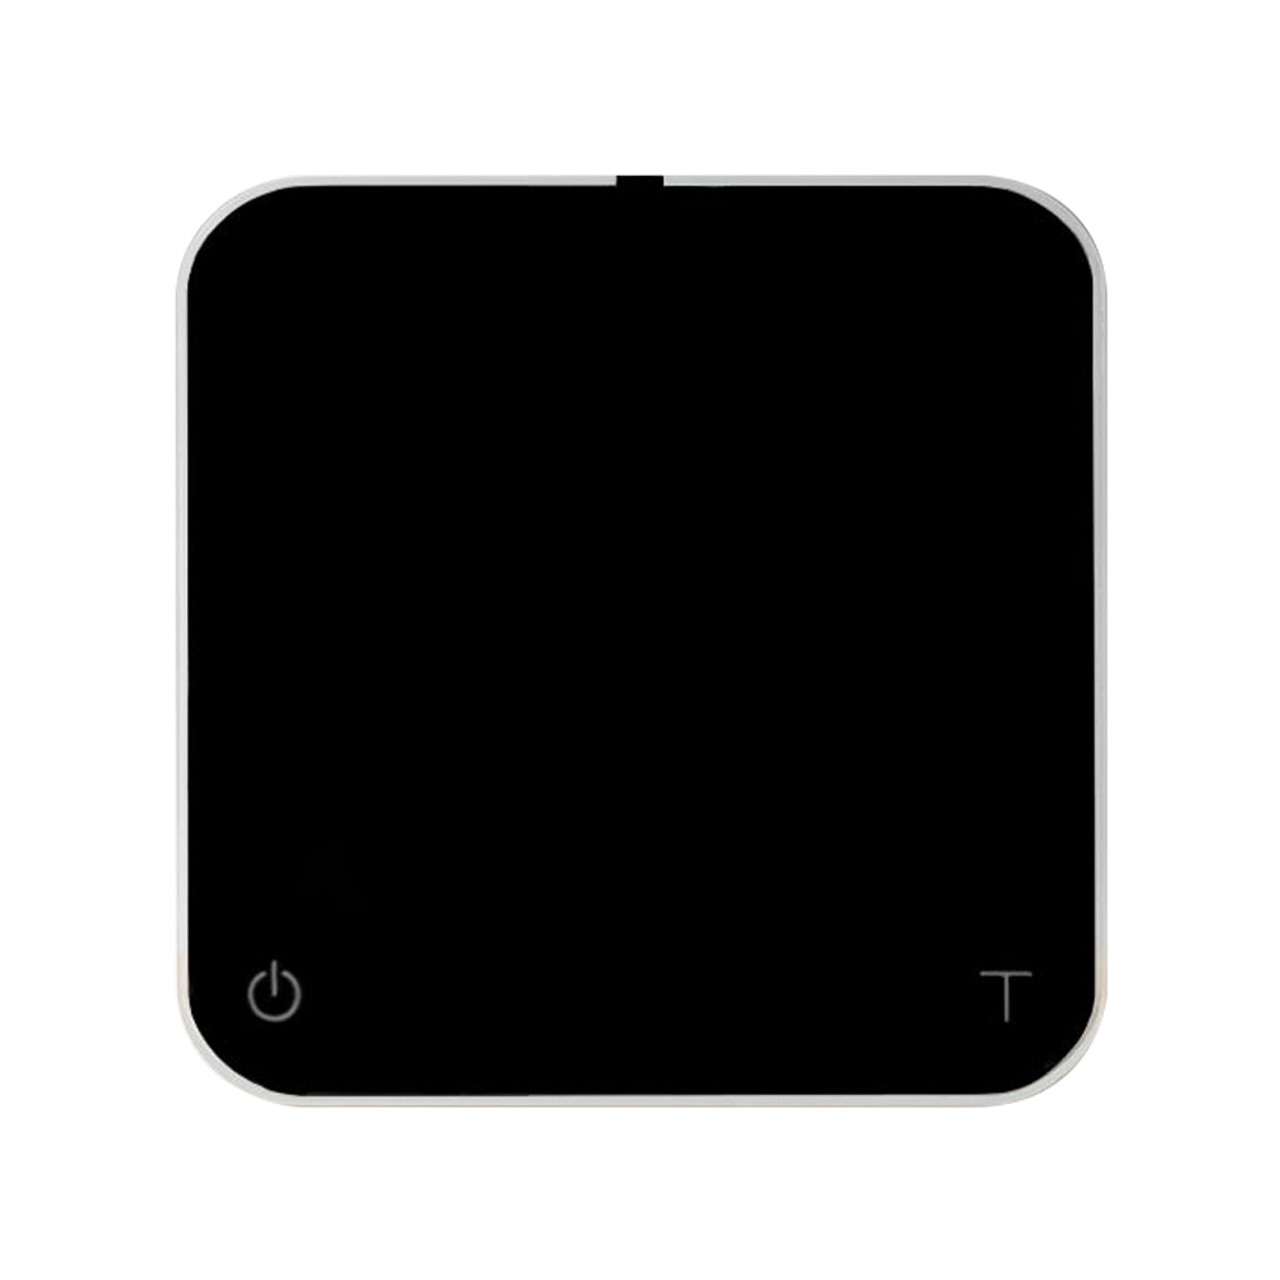 Acaia Pearl Digital Scale - Black for sale online